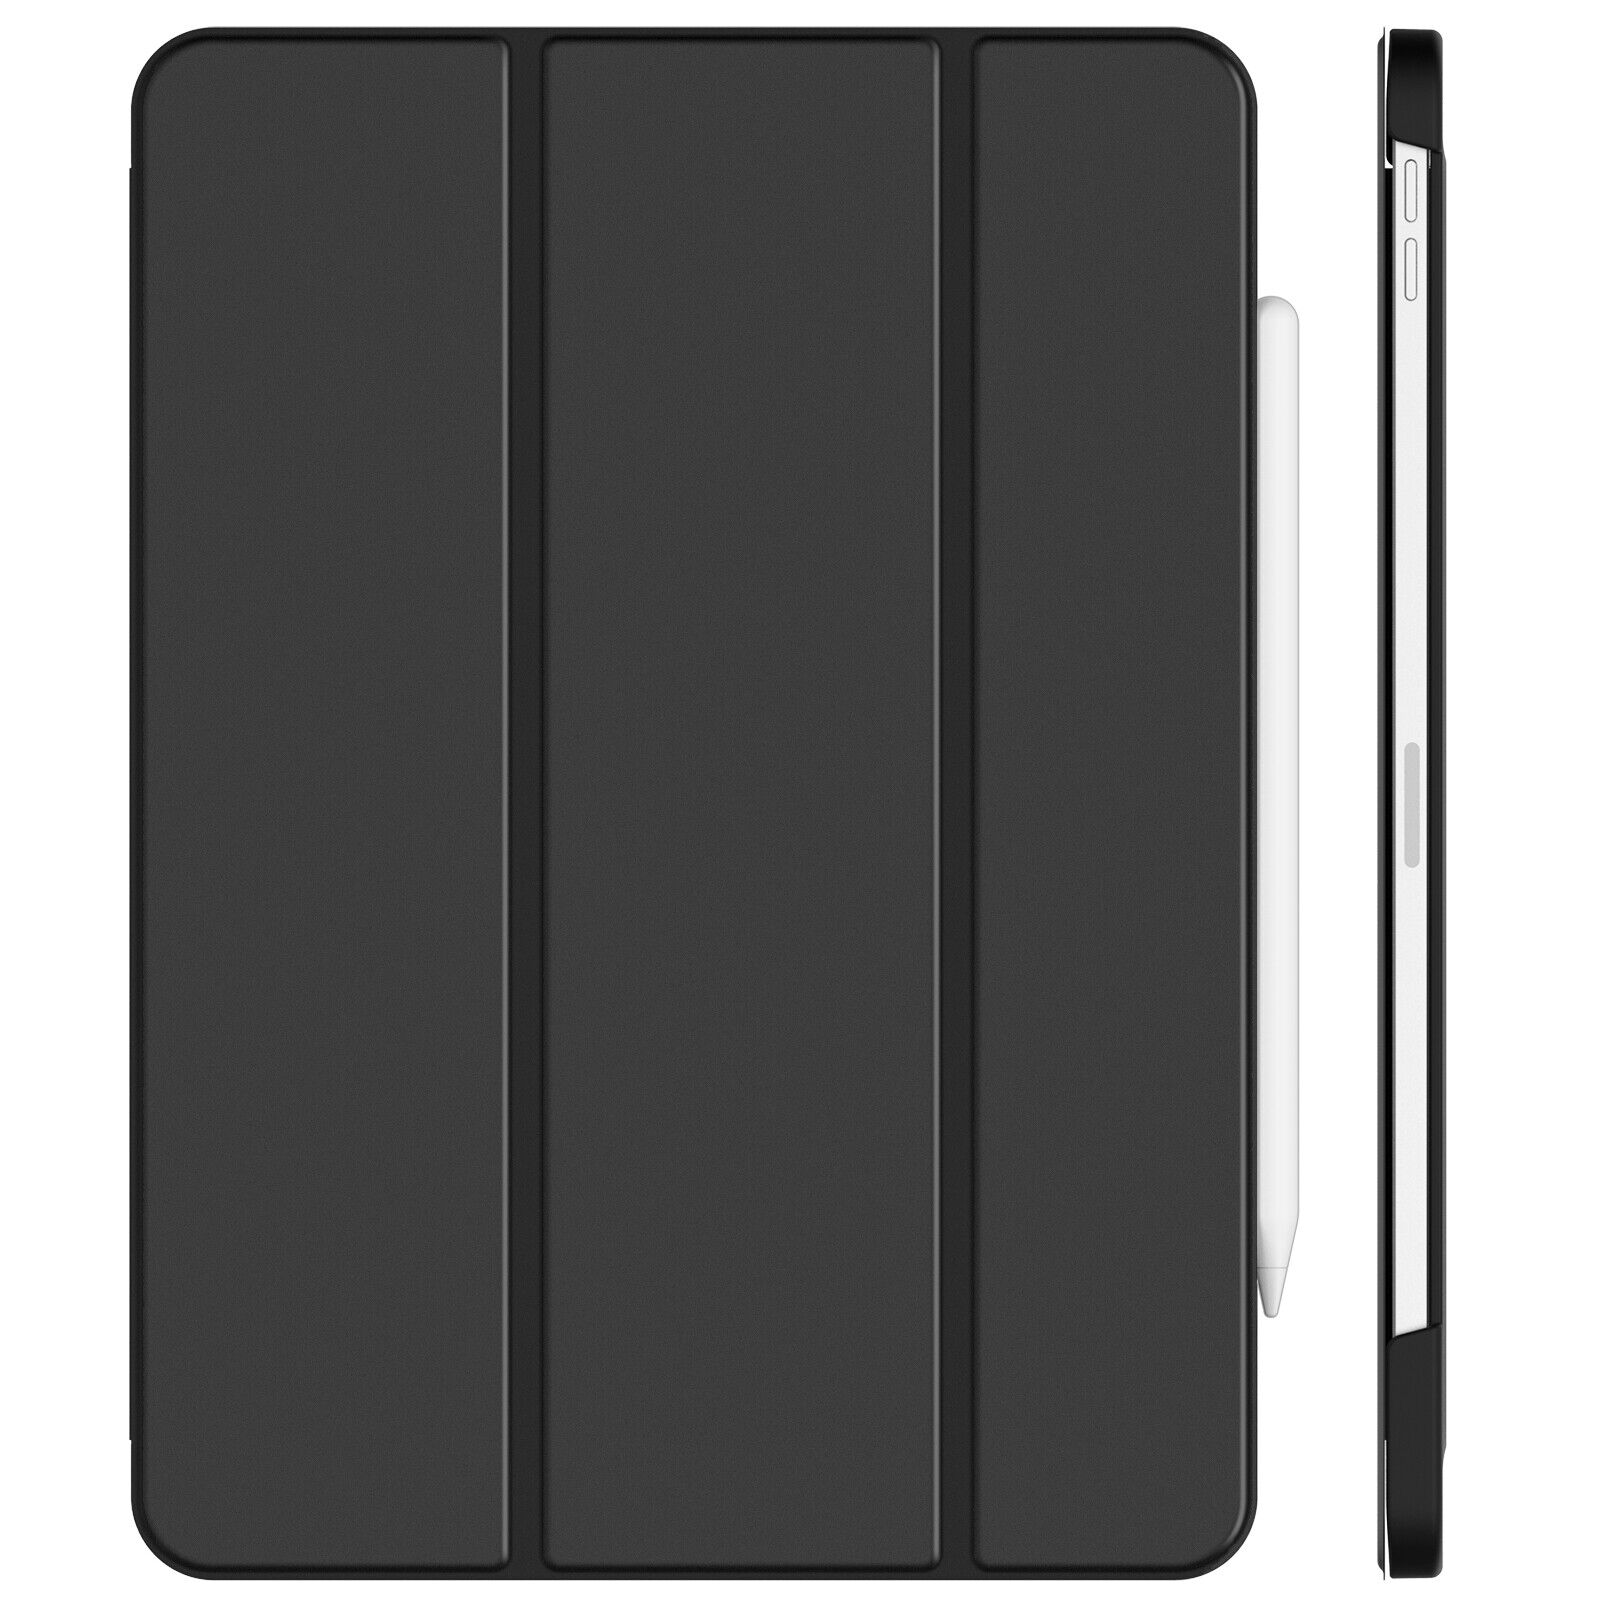 JETech Case for iPad Pro 11-Inch 2021/2020/2018 Model Smart Cover